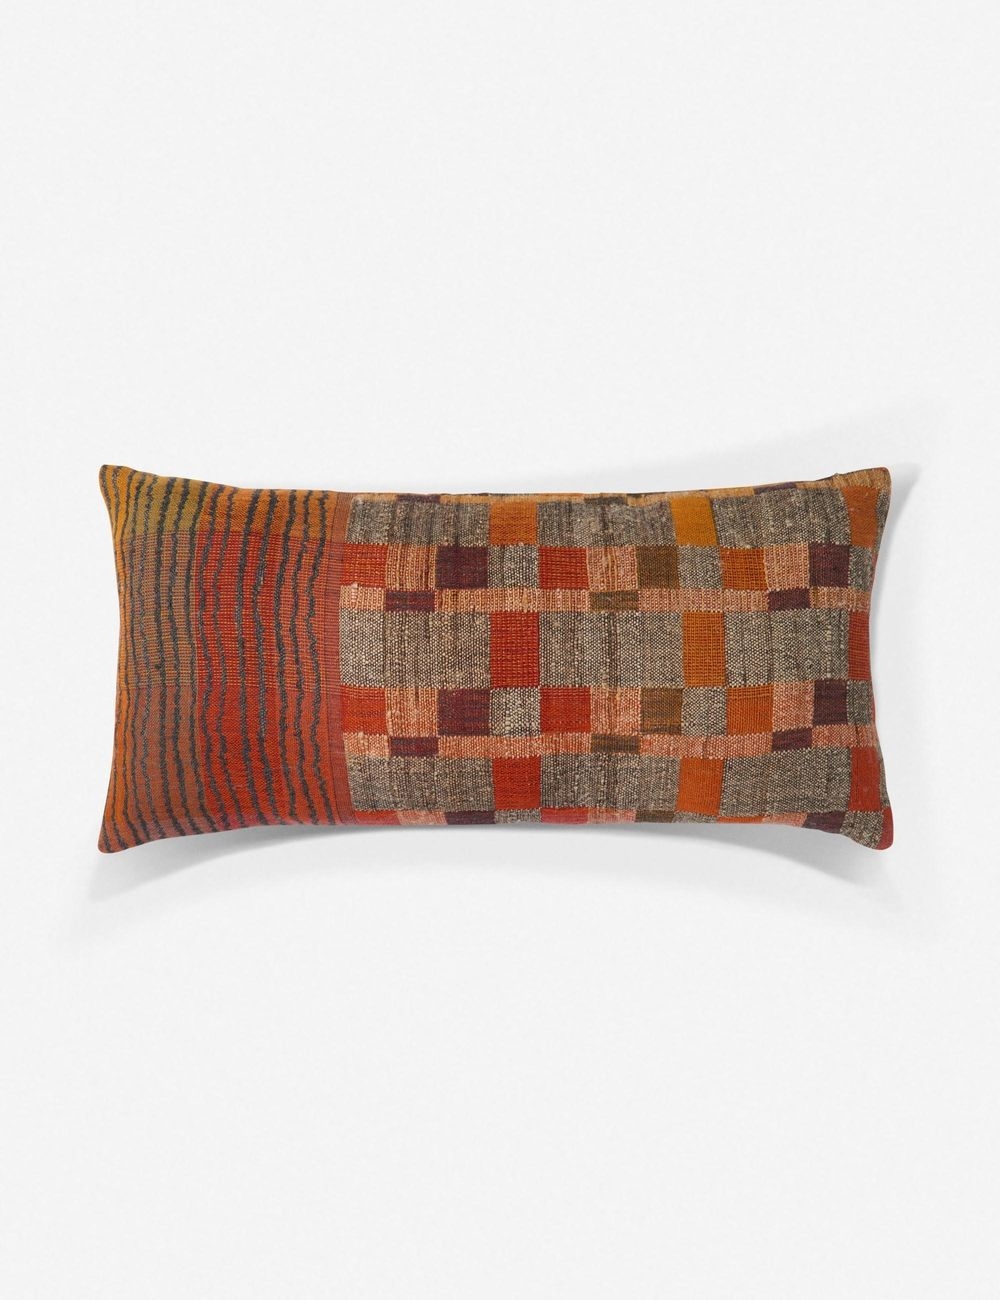 Sienne Lumbar Pillow, Rust and Multi, ED Ellen DeGeneres Crafted by Loloi 27" x 12" - Image 0